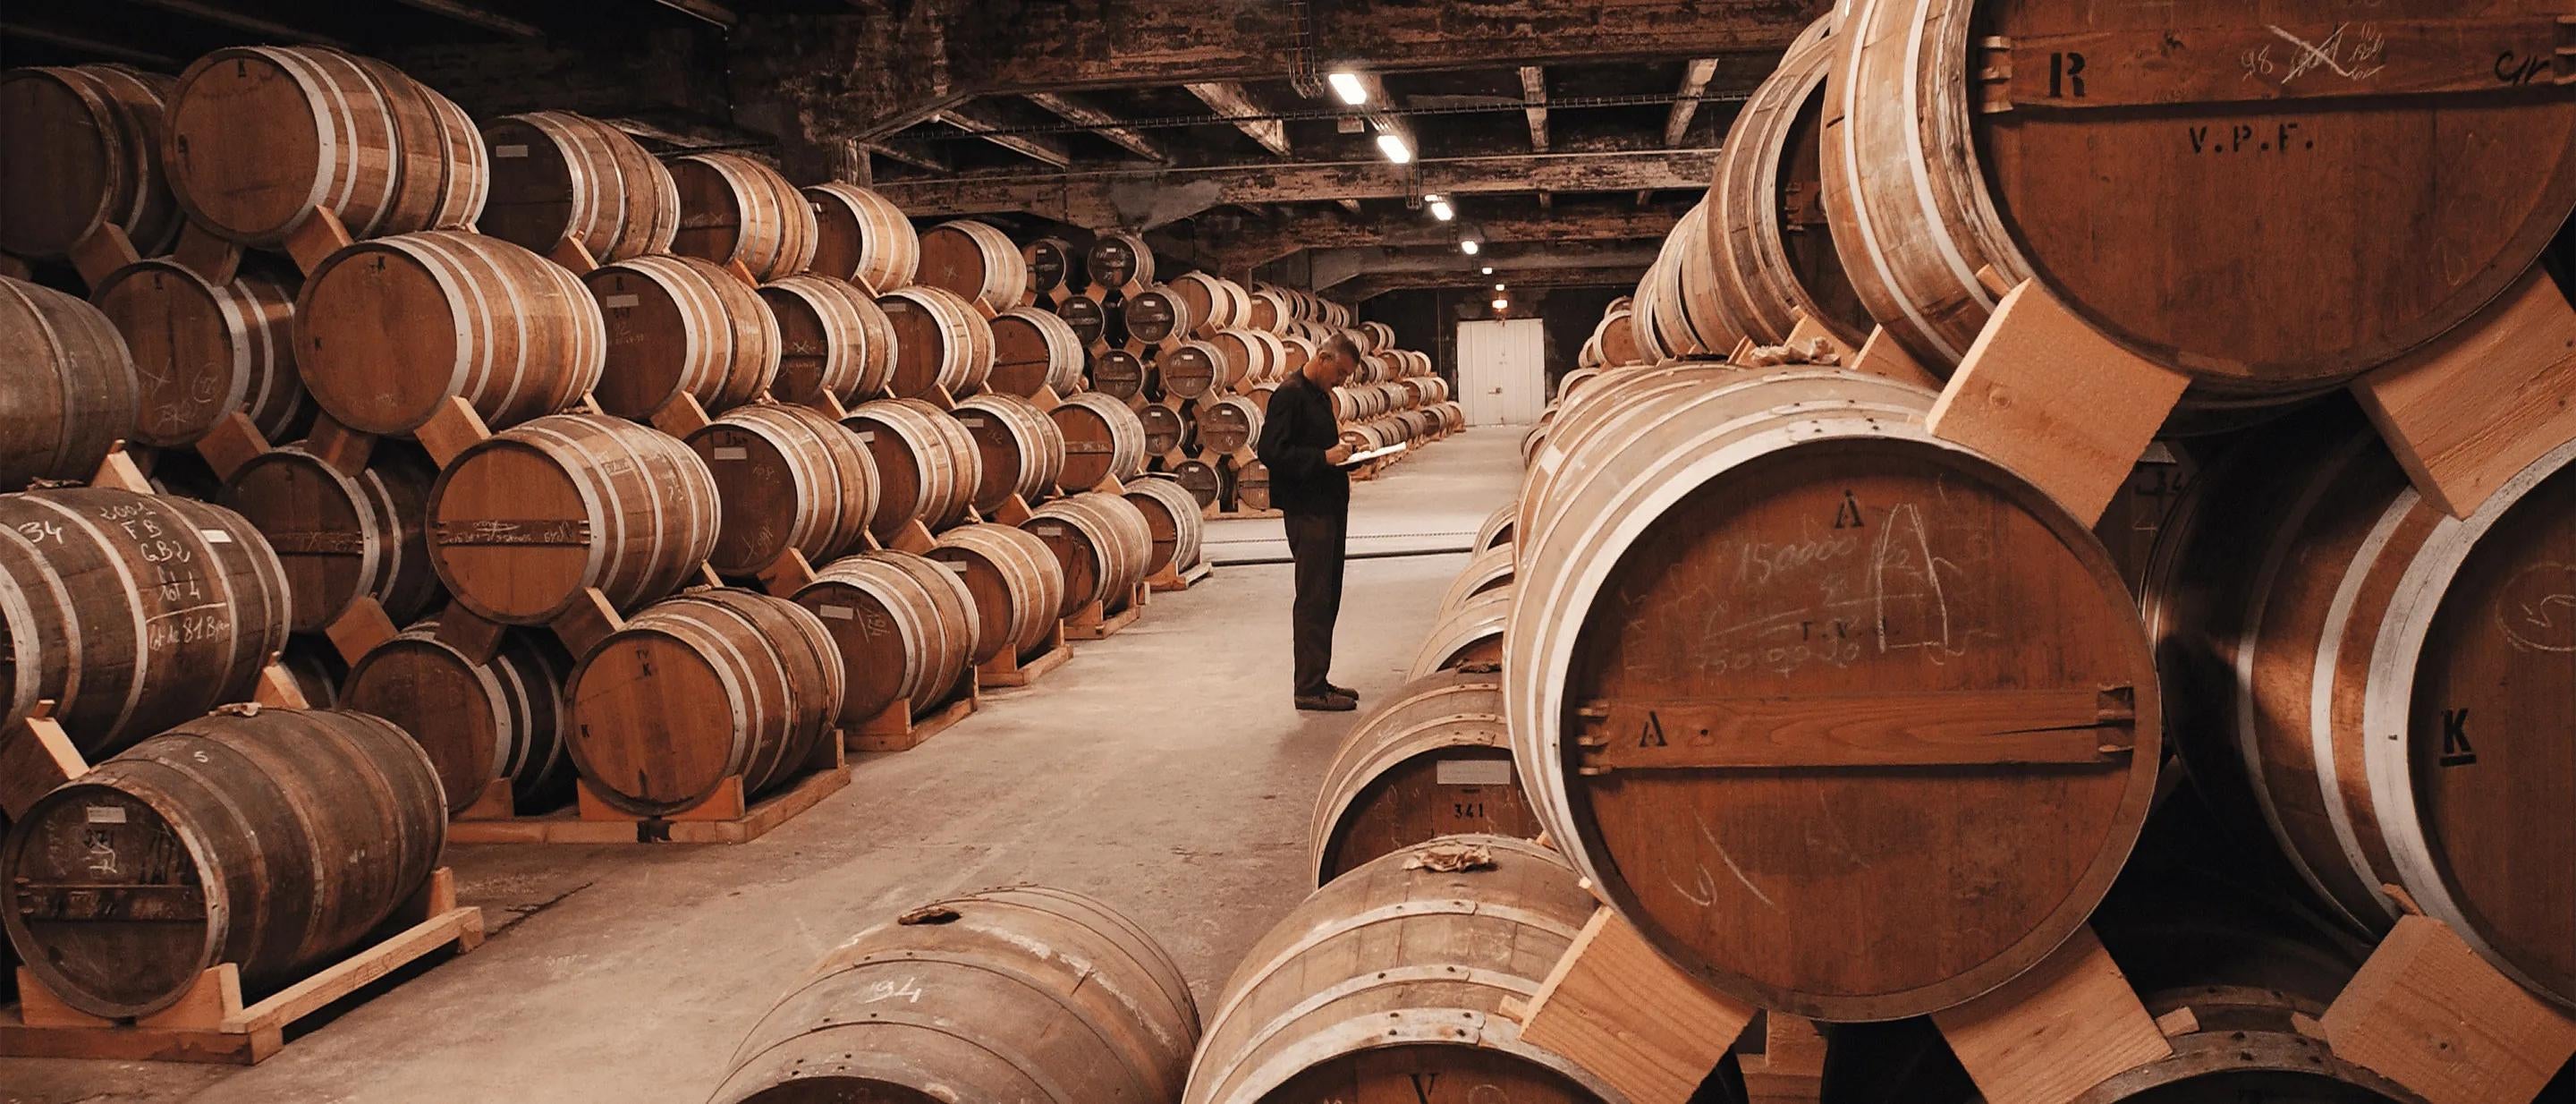 Barrels in the cellar at Maison Martell, in Cognac, France.